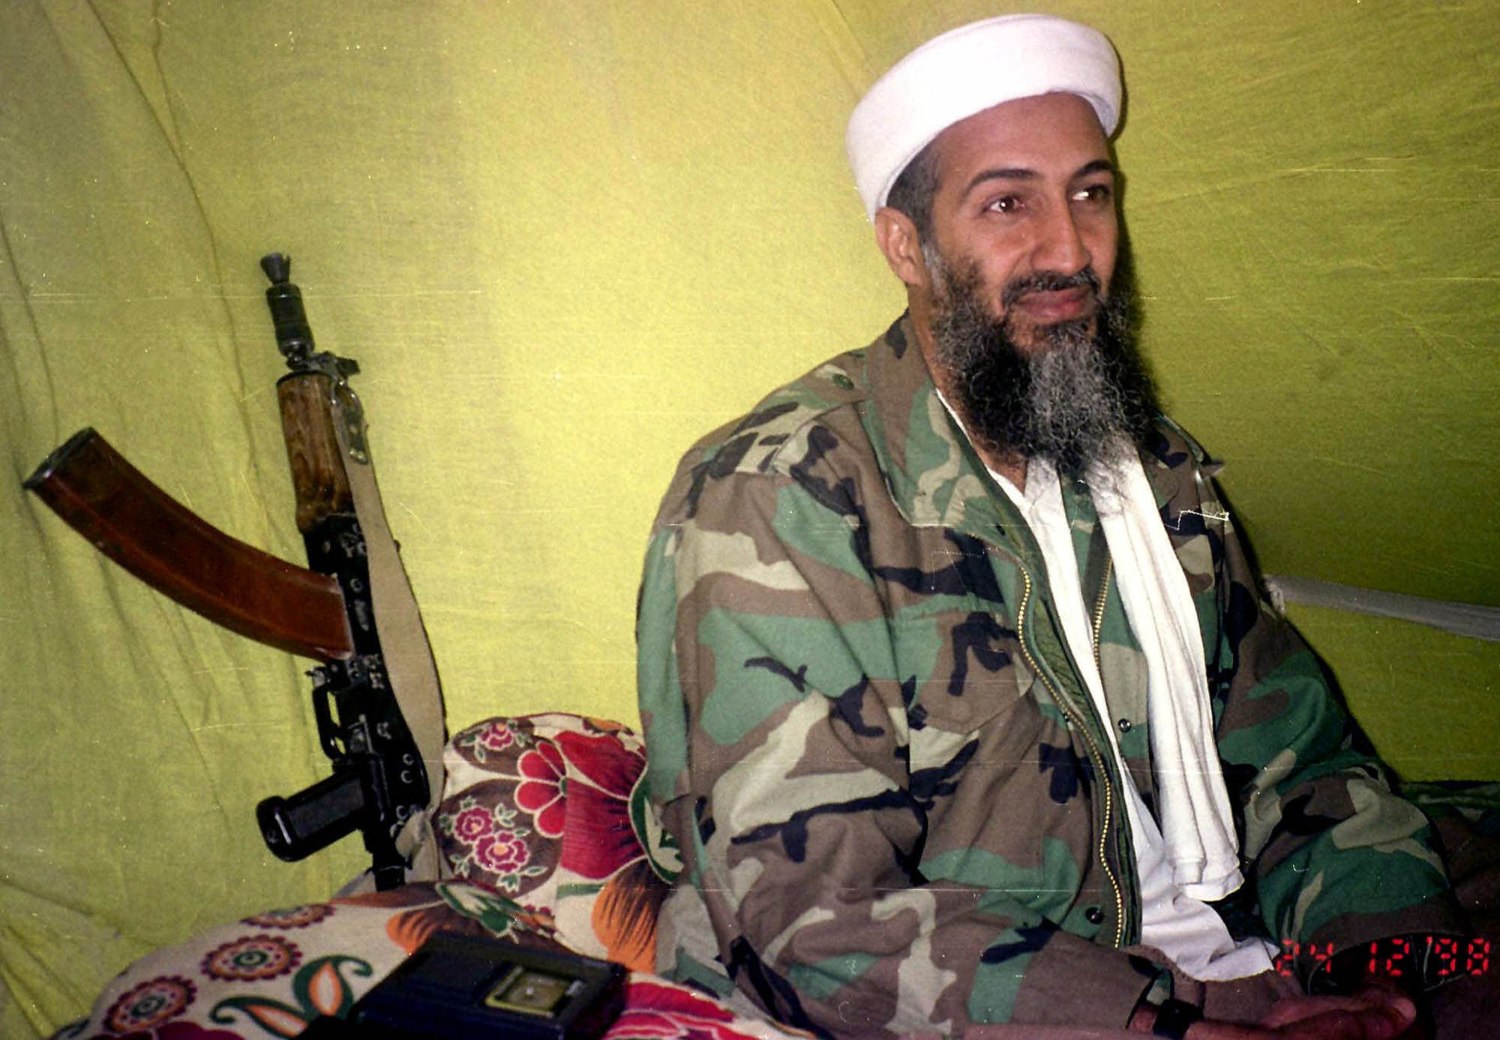 Hashtag related to Osama bin Laden's 'Letter to America' removed by TikTok